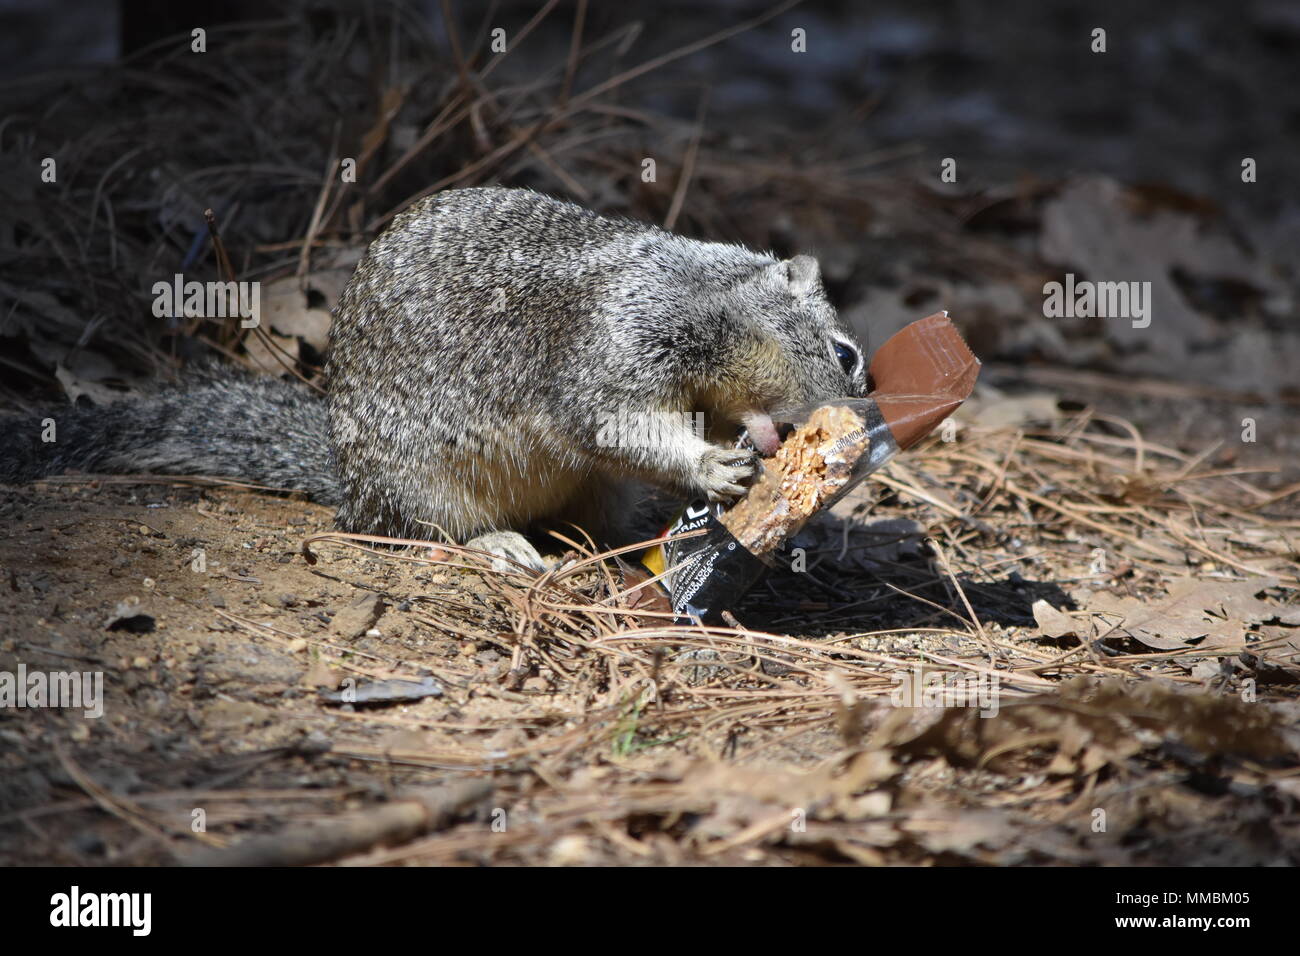 A California Ground Squirrel feasting on a stolen Kind Bar in Lower Pines Campground, Yosemite Valley, CA. Stock Photo